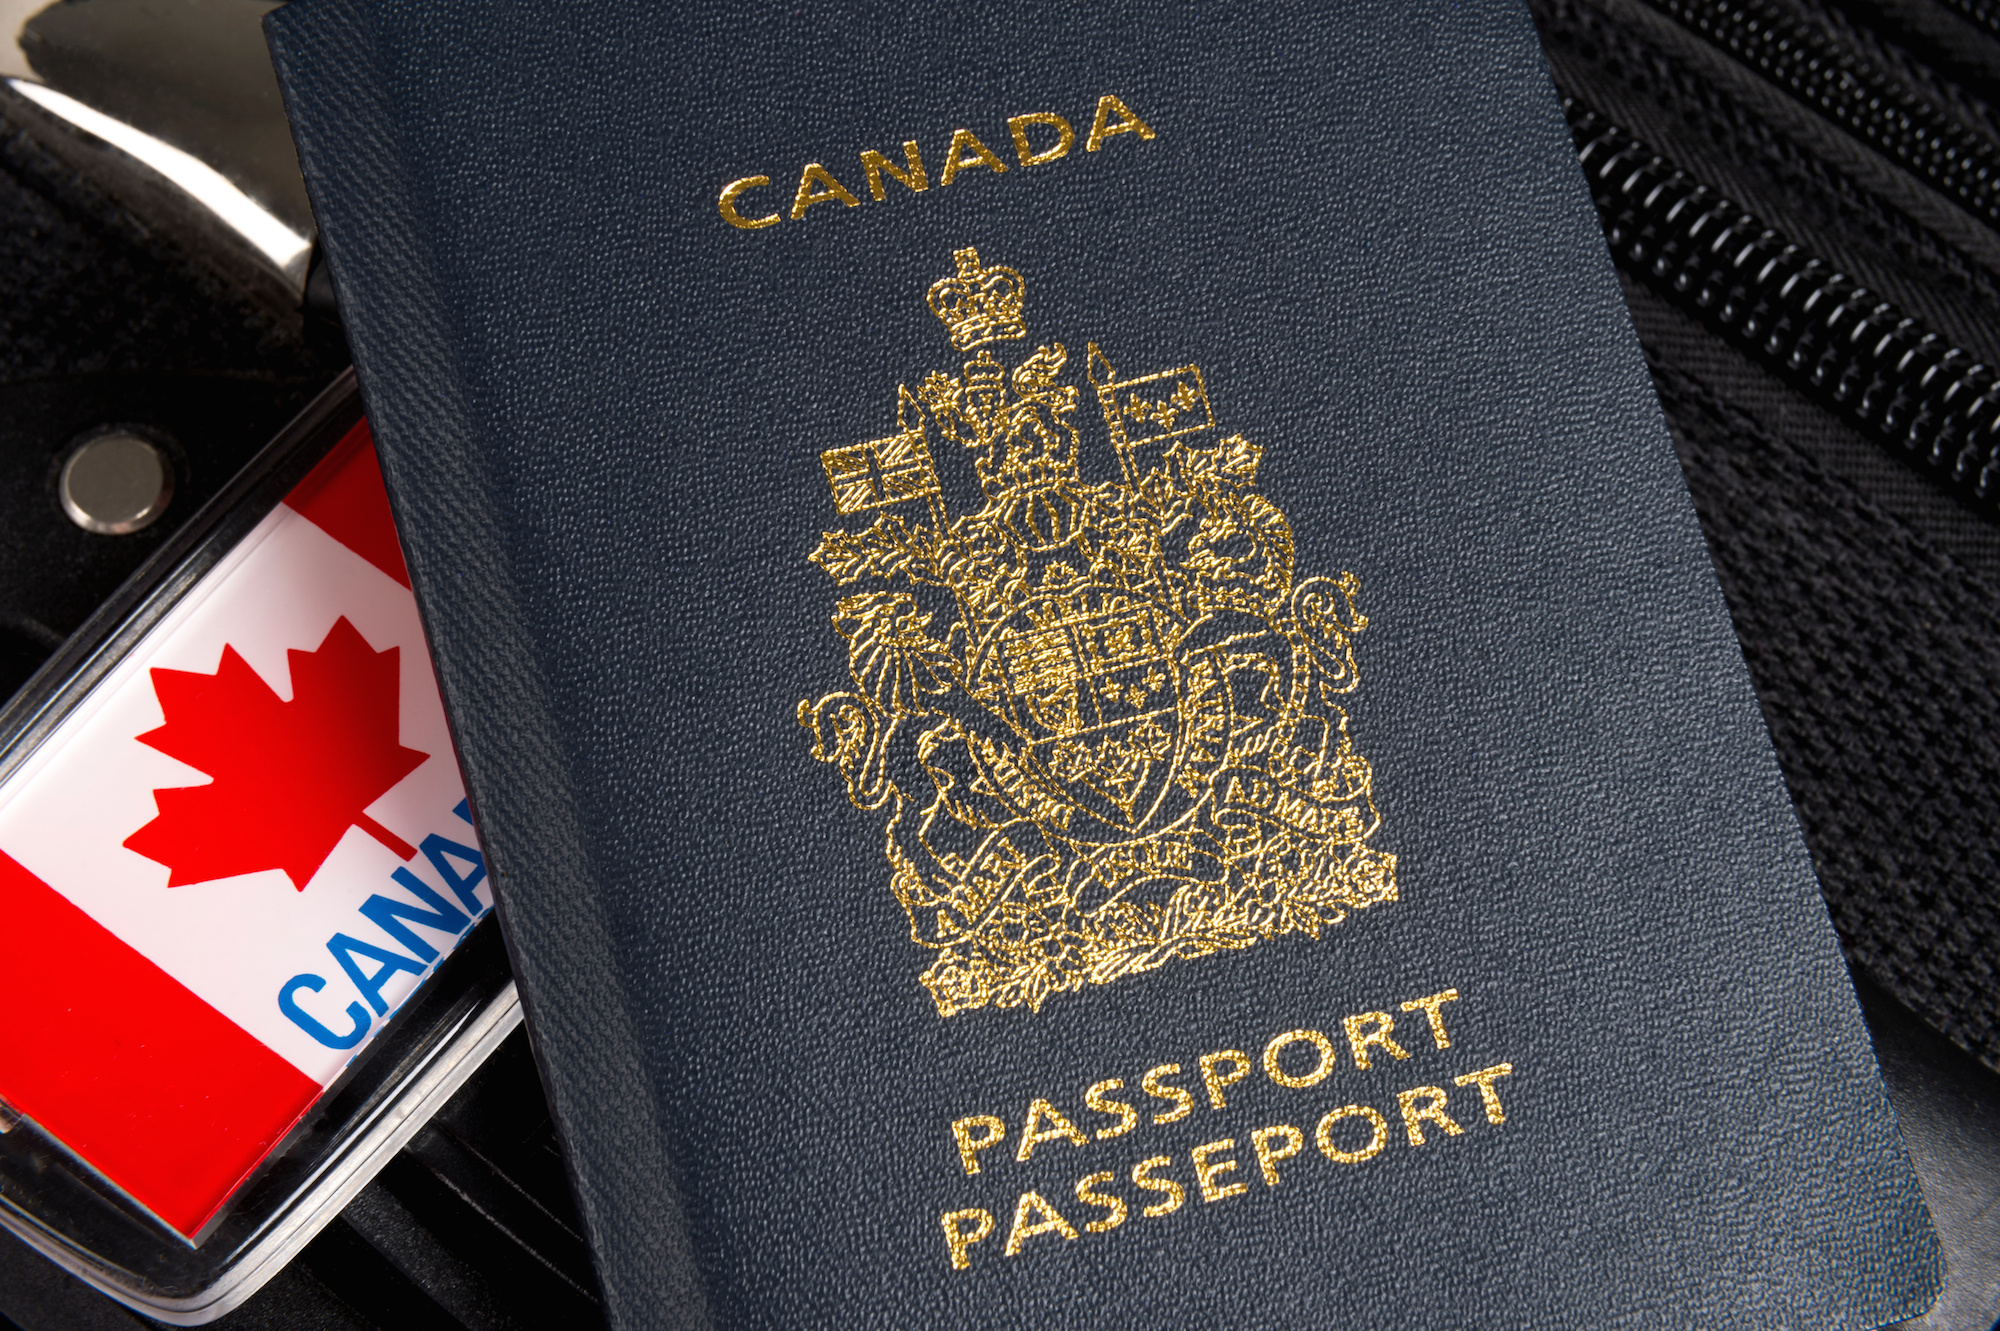 10-day passport service now offered in Timmins - Timmins News